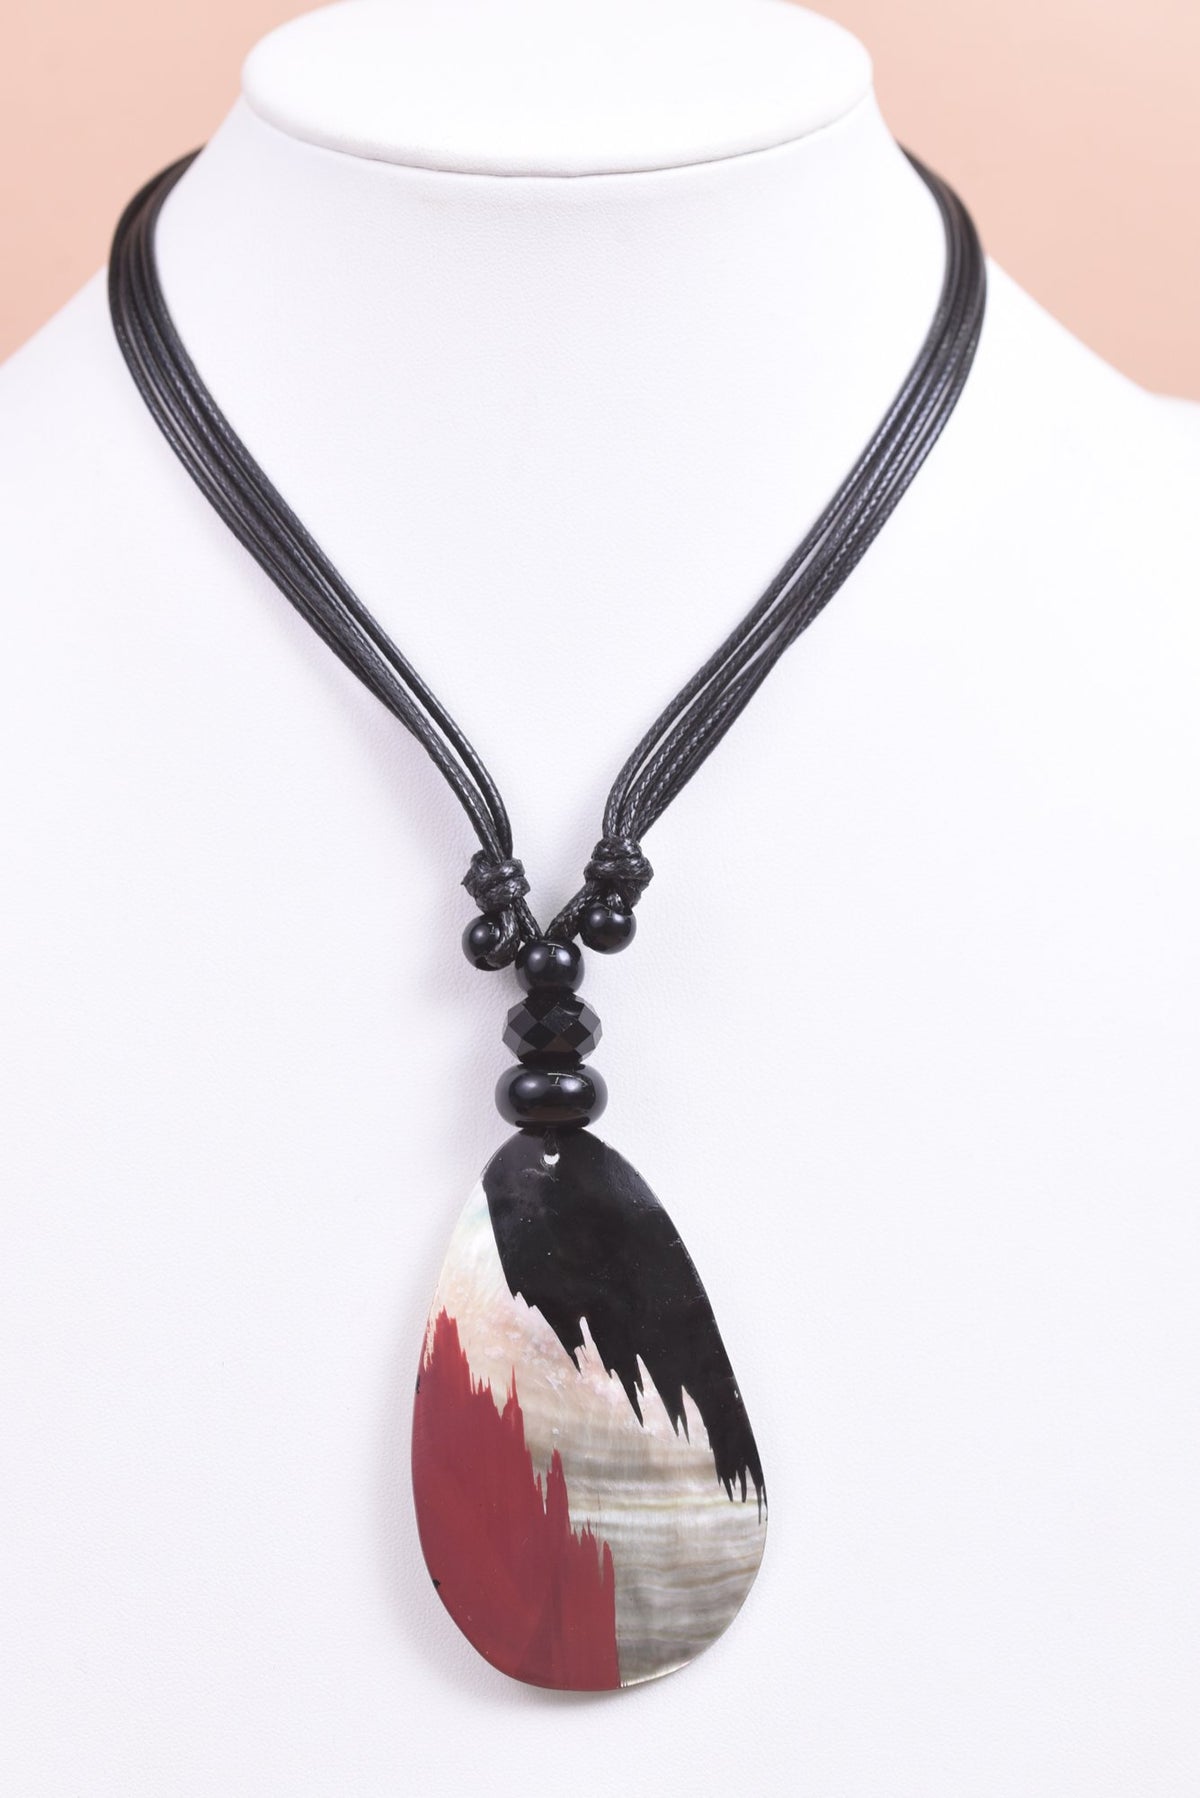 Red/Black/Layered/Beaded/Painted Teardrop Shell Necklace - NEK3952RD